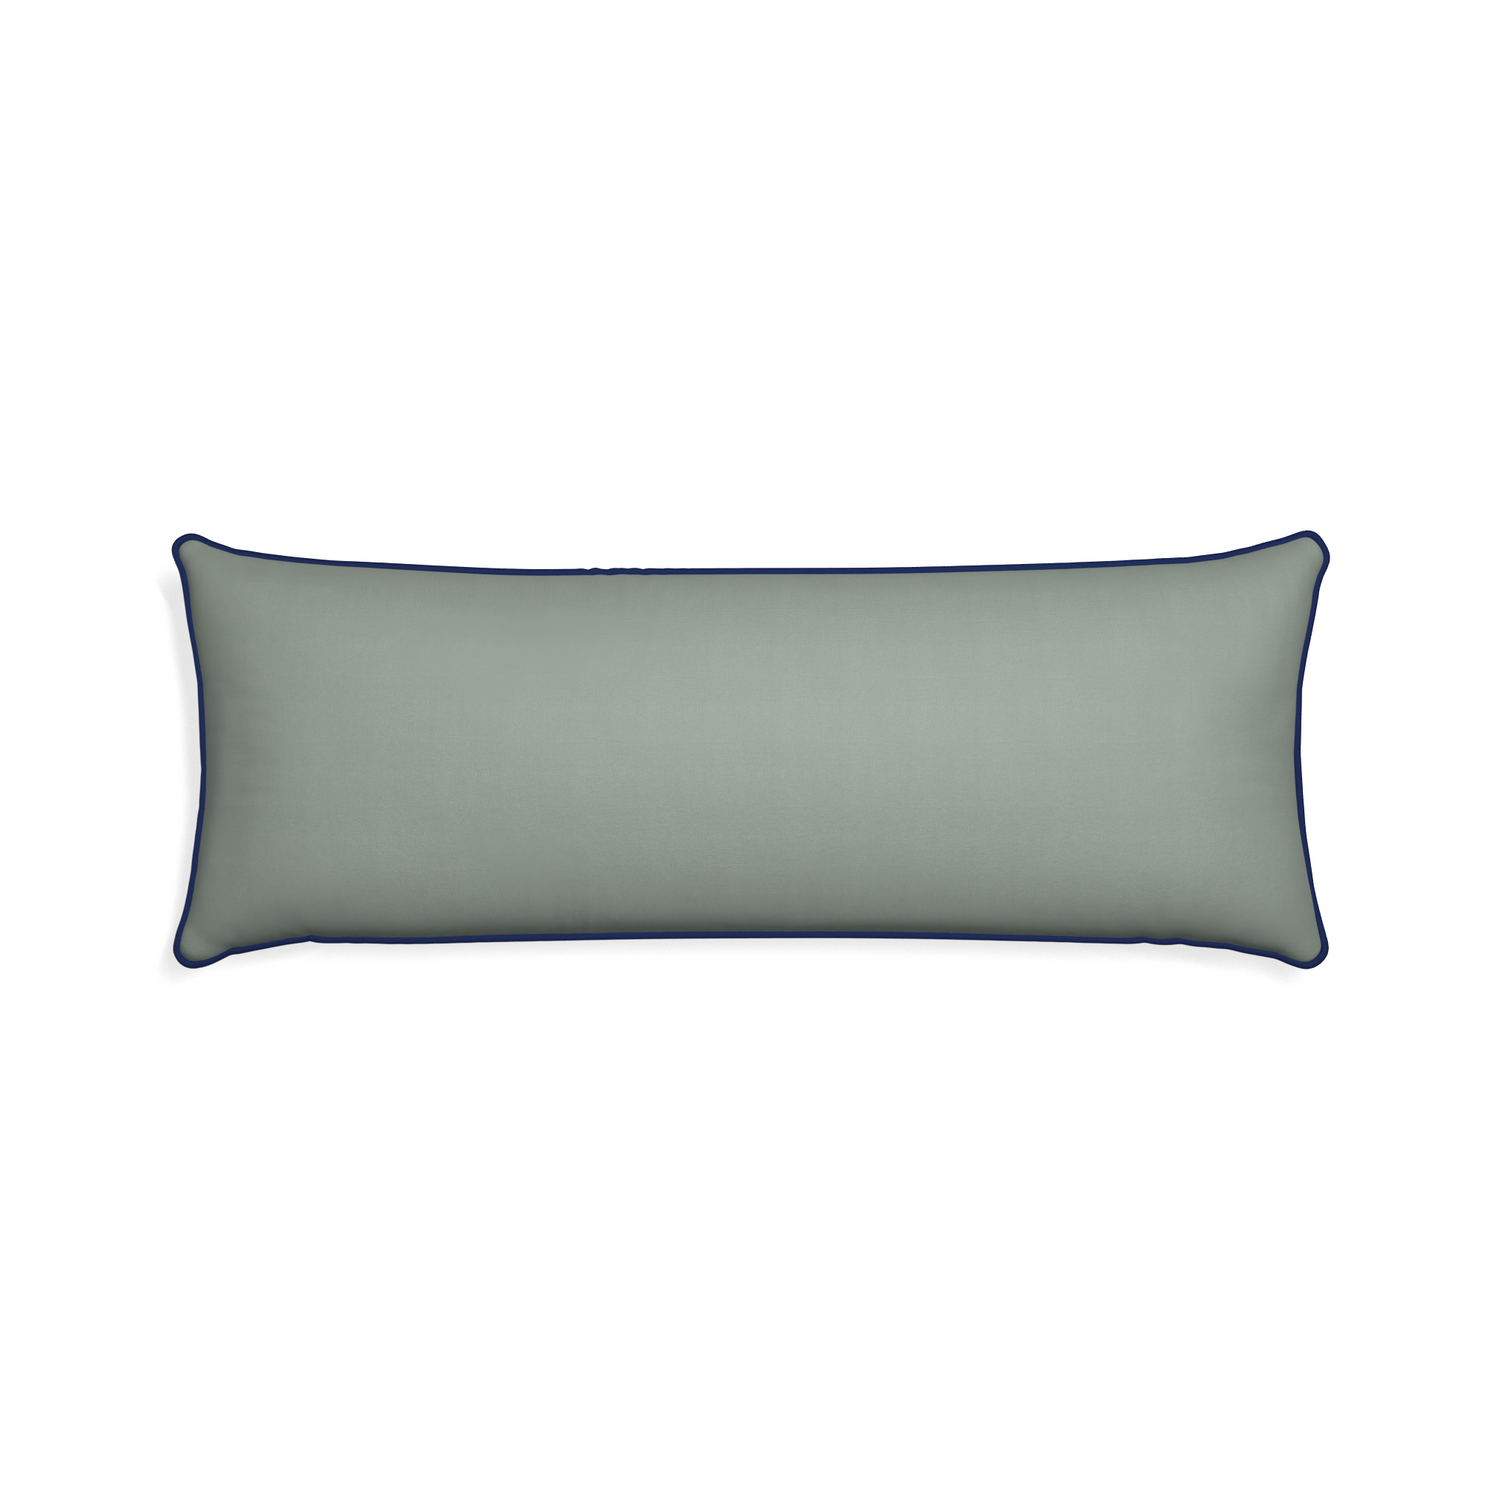 Xl-lumbar sage custom pillow with midnight piping on white background